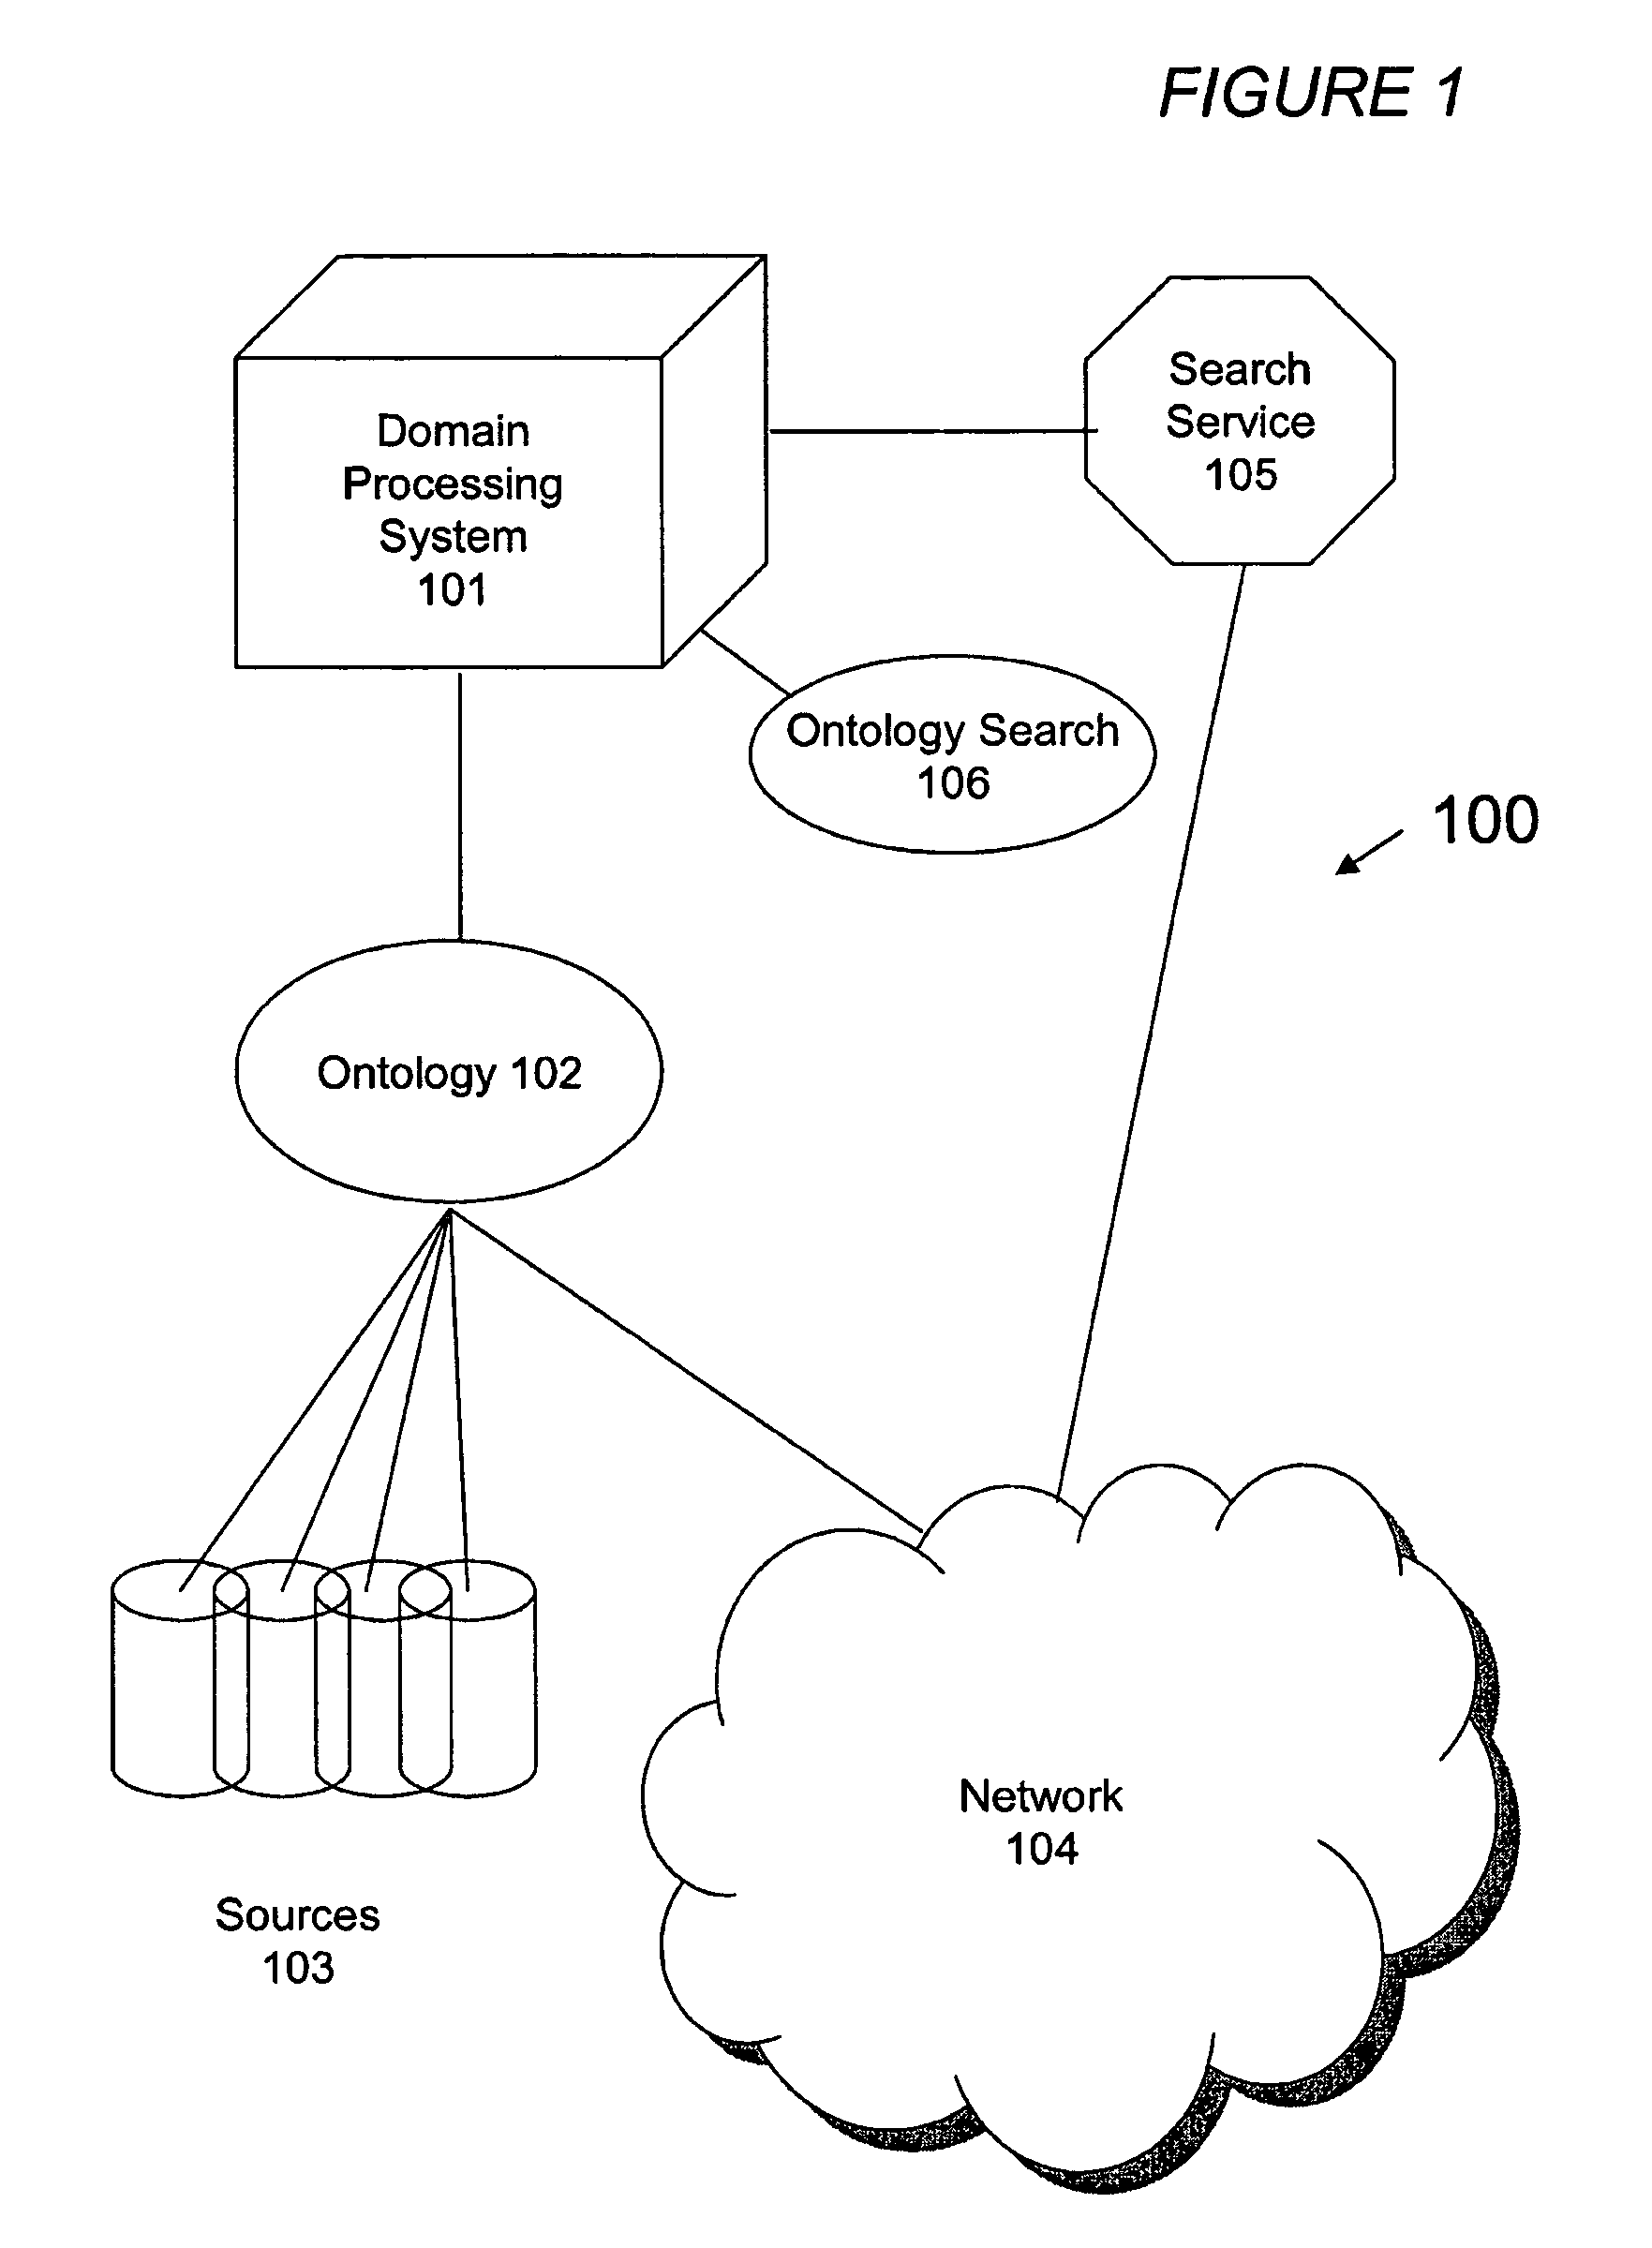 Domain knowledge-assisted information processing